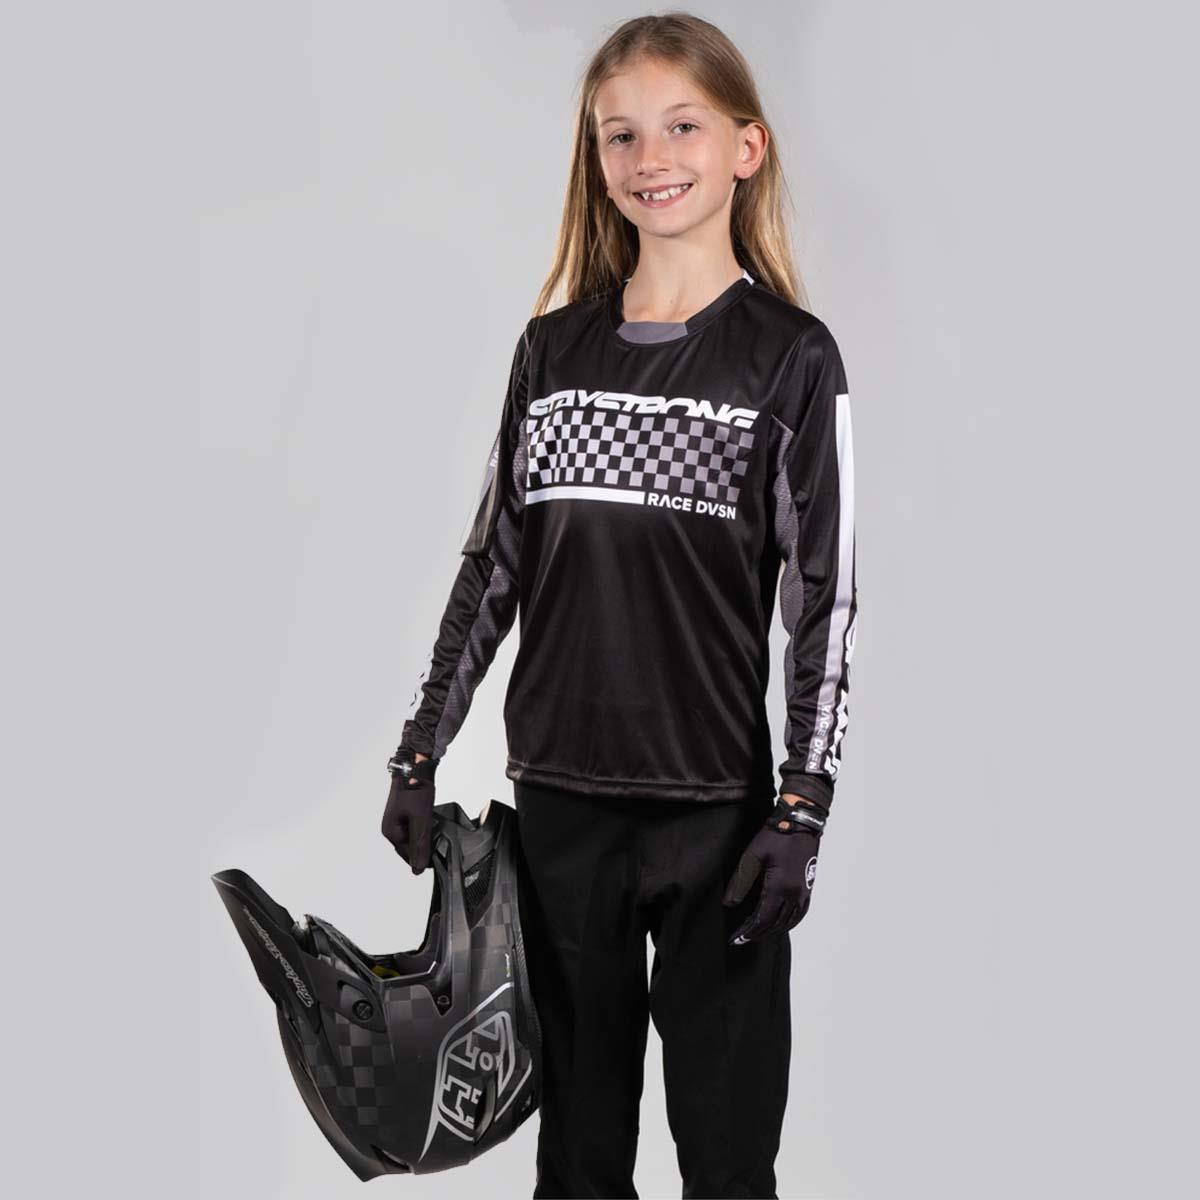 Stay Strong Youth Checker Race Jersey - Black 5-6 years